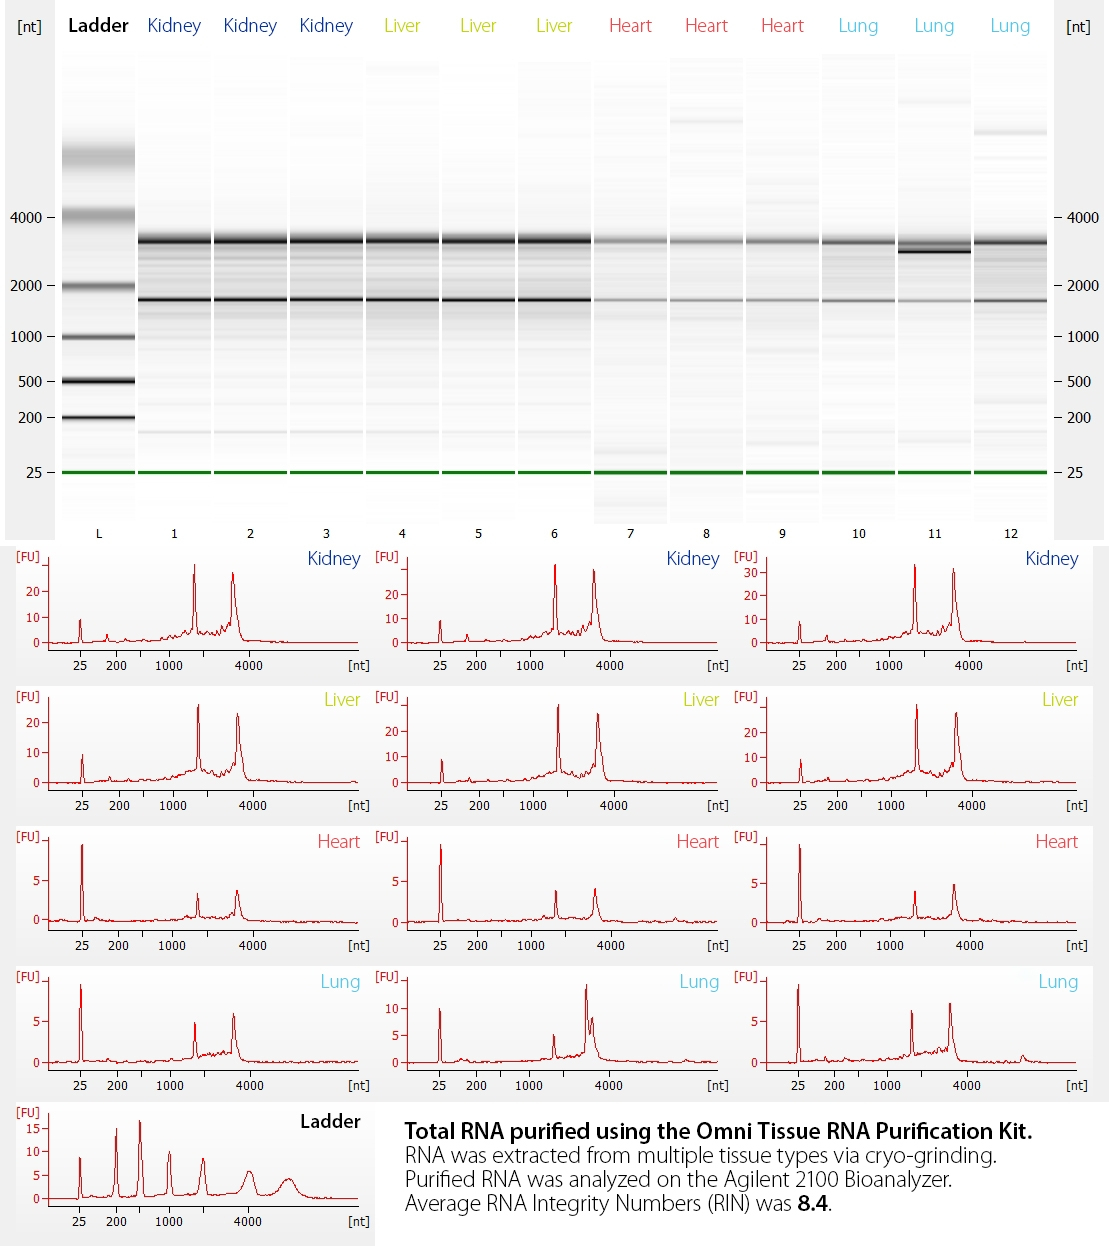 Total RNA purified using the Omni Tissue RNA Purification Kit. RNA was extracted from multiple tissue types via cryo-grinding. Purified RNA was analyzed on the Agilent 2100 Bioanalyzer. Average RNA Integrity Numbers (RIN) was 8.4.